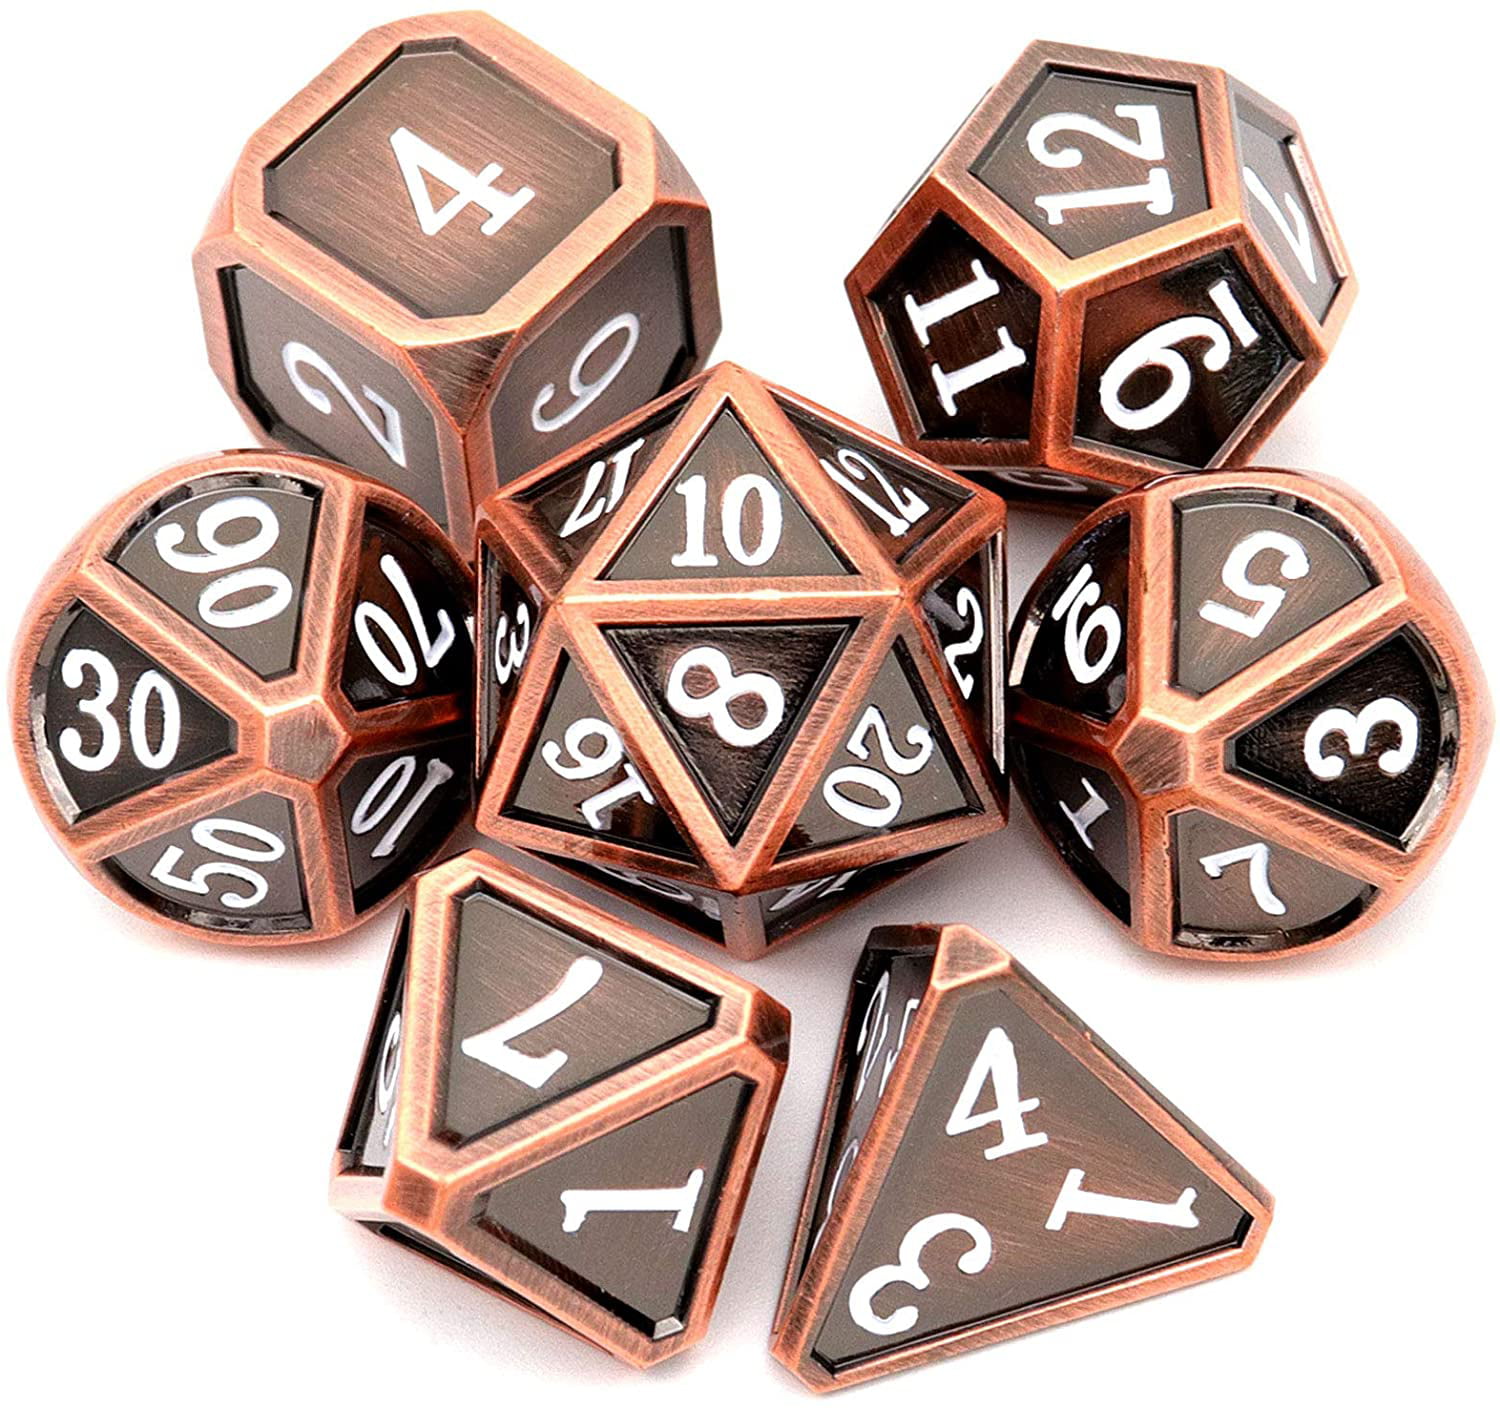 7Pcs/set Gold/White Antique Metal Polyhedral Dice Role Playing Game With Bag 